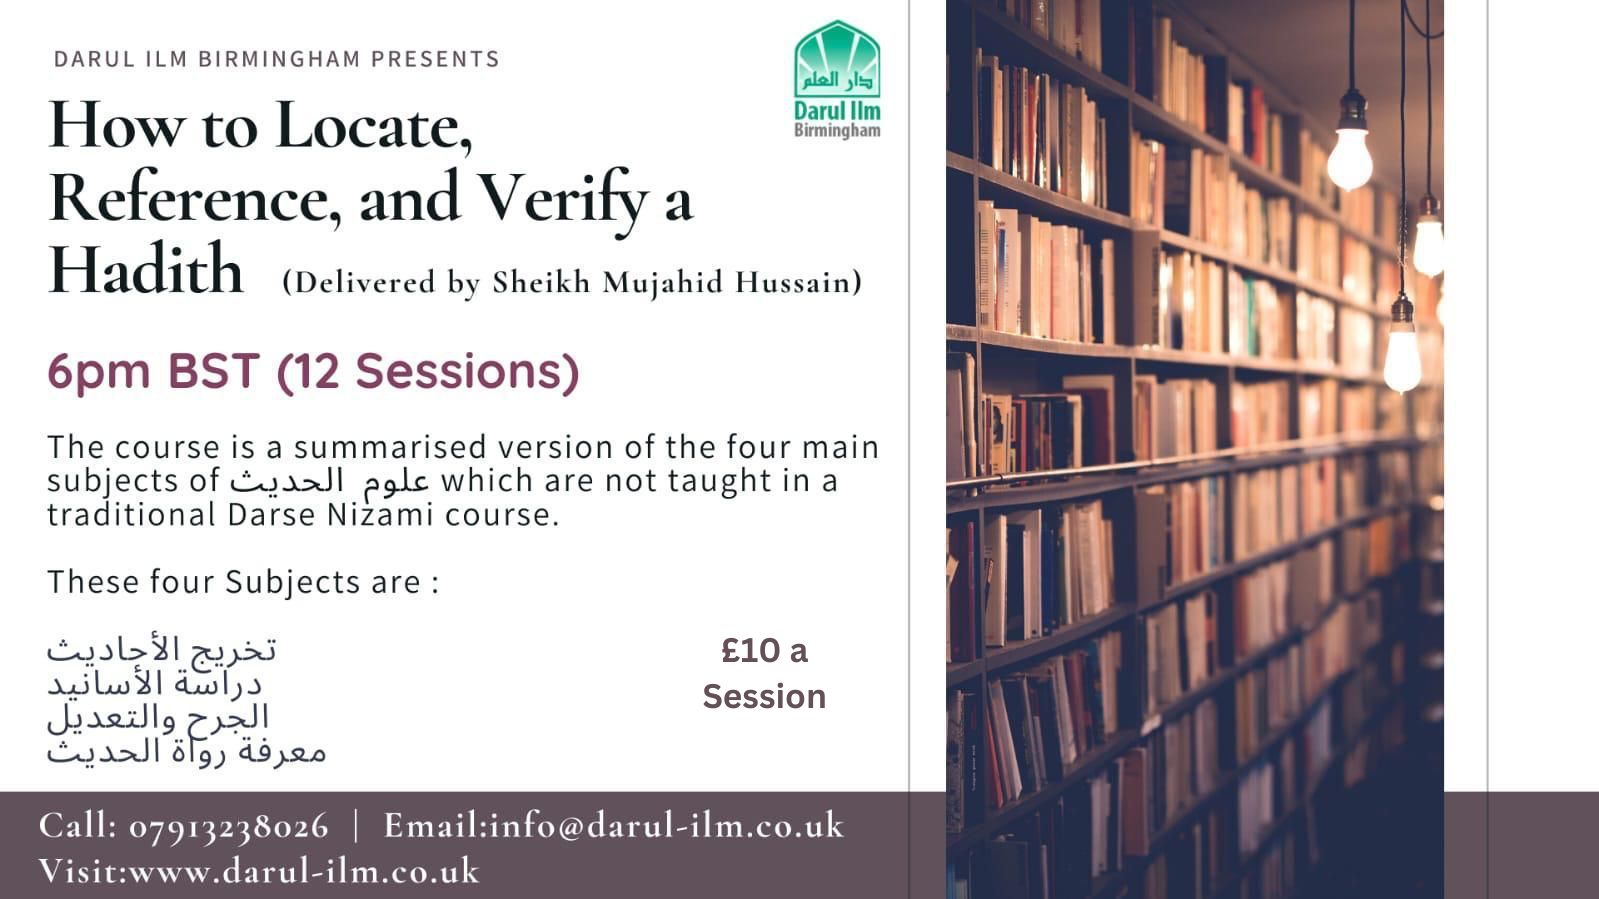 How to Locate, Reference, and Verify a Hadith